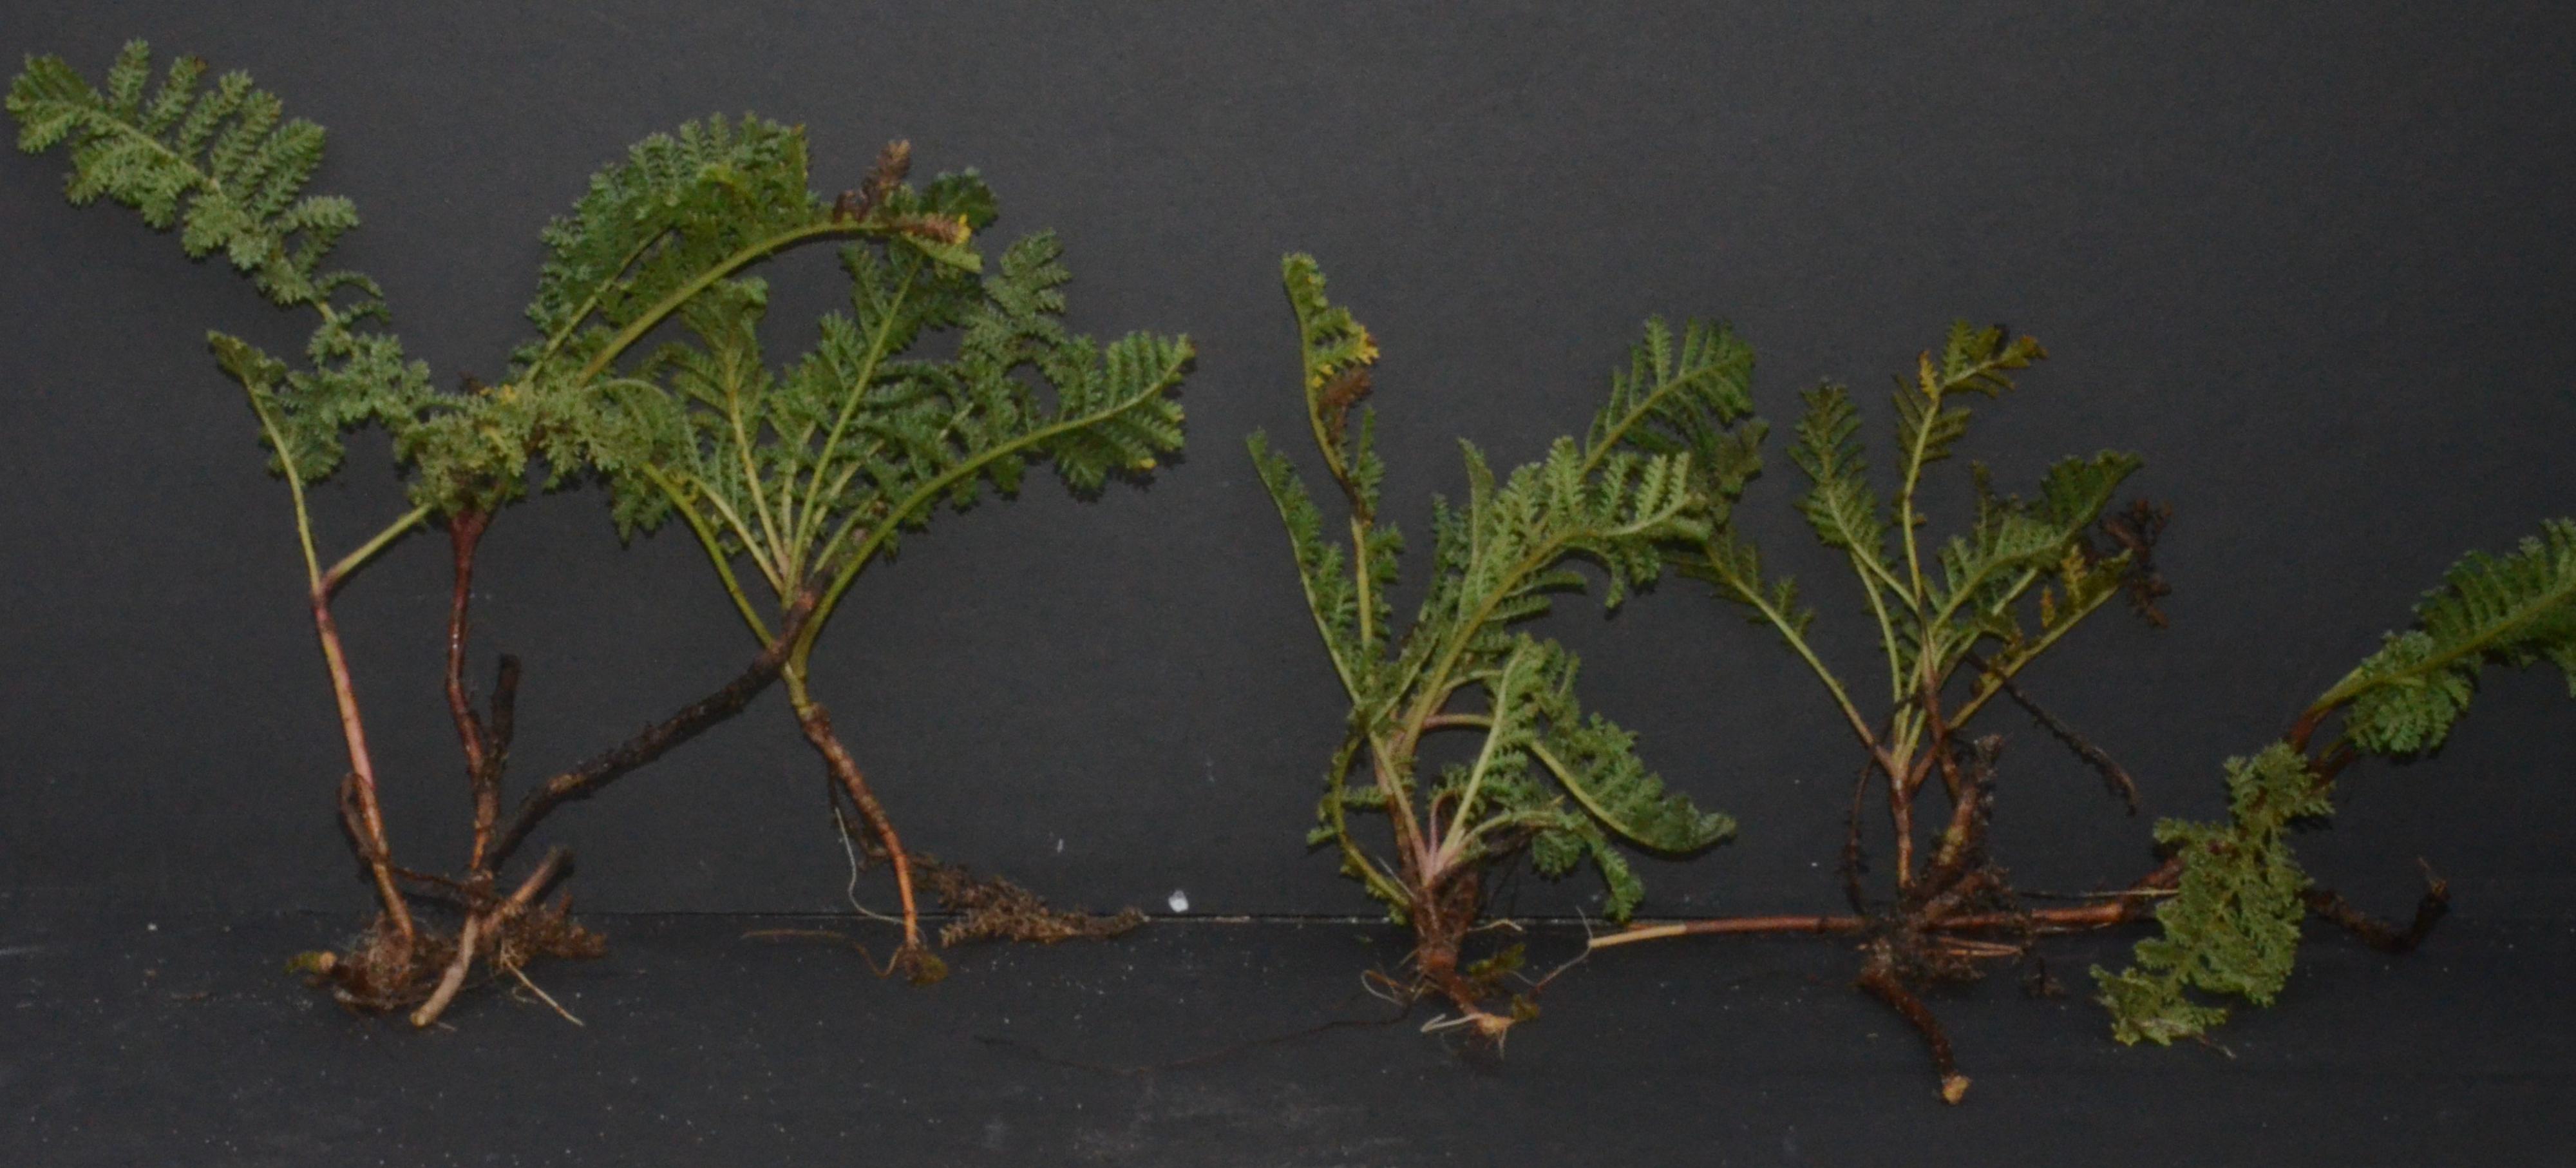 Tanacetum bipinnatum divisions with roots, stems, and leaves present. 